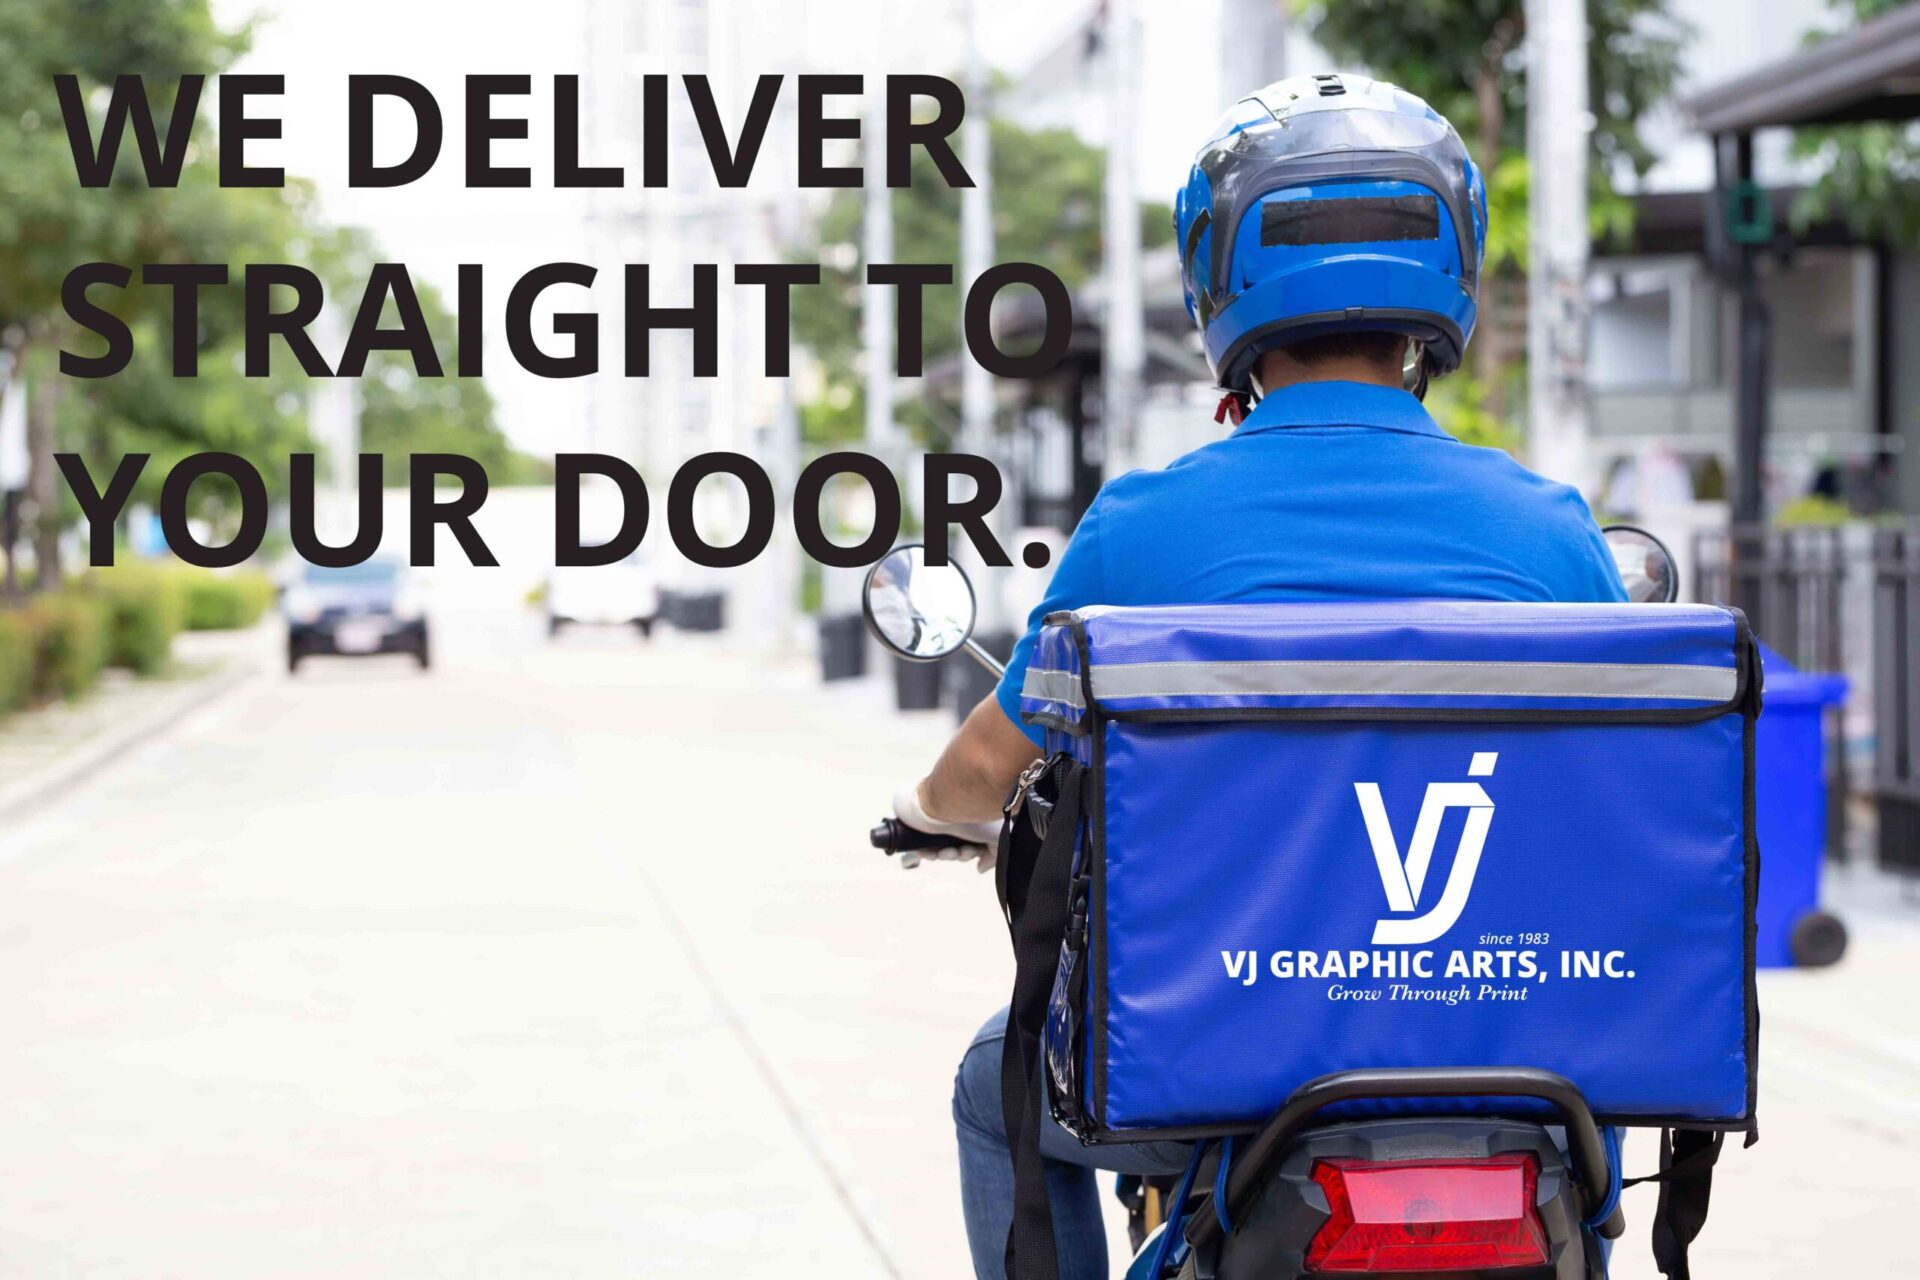 Delivery man wearing blue uniform riding motorcycle and delivery